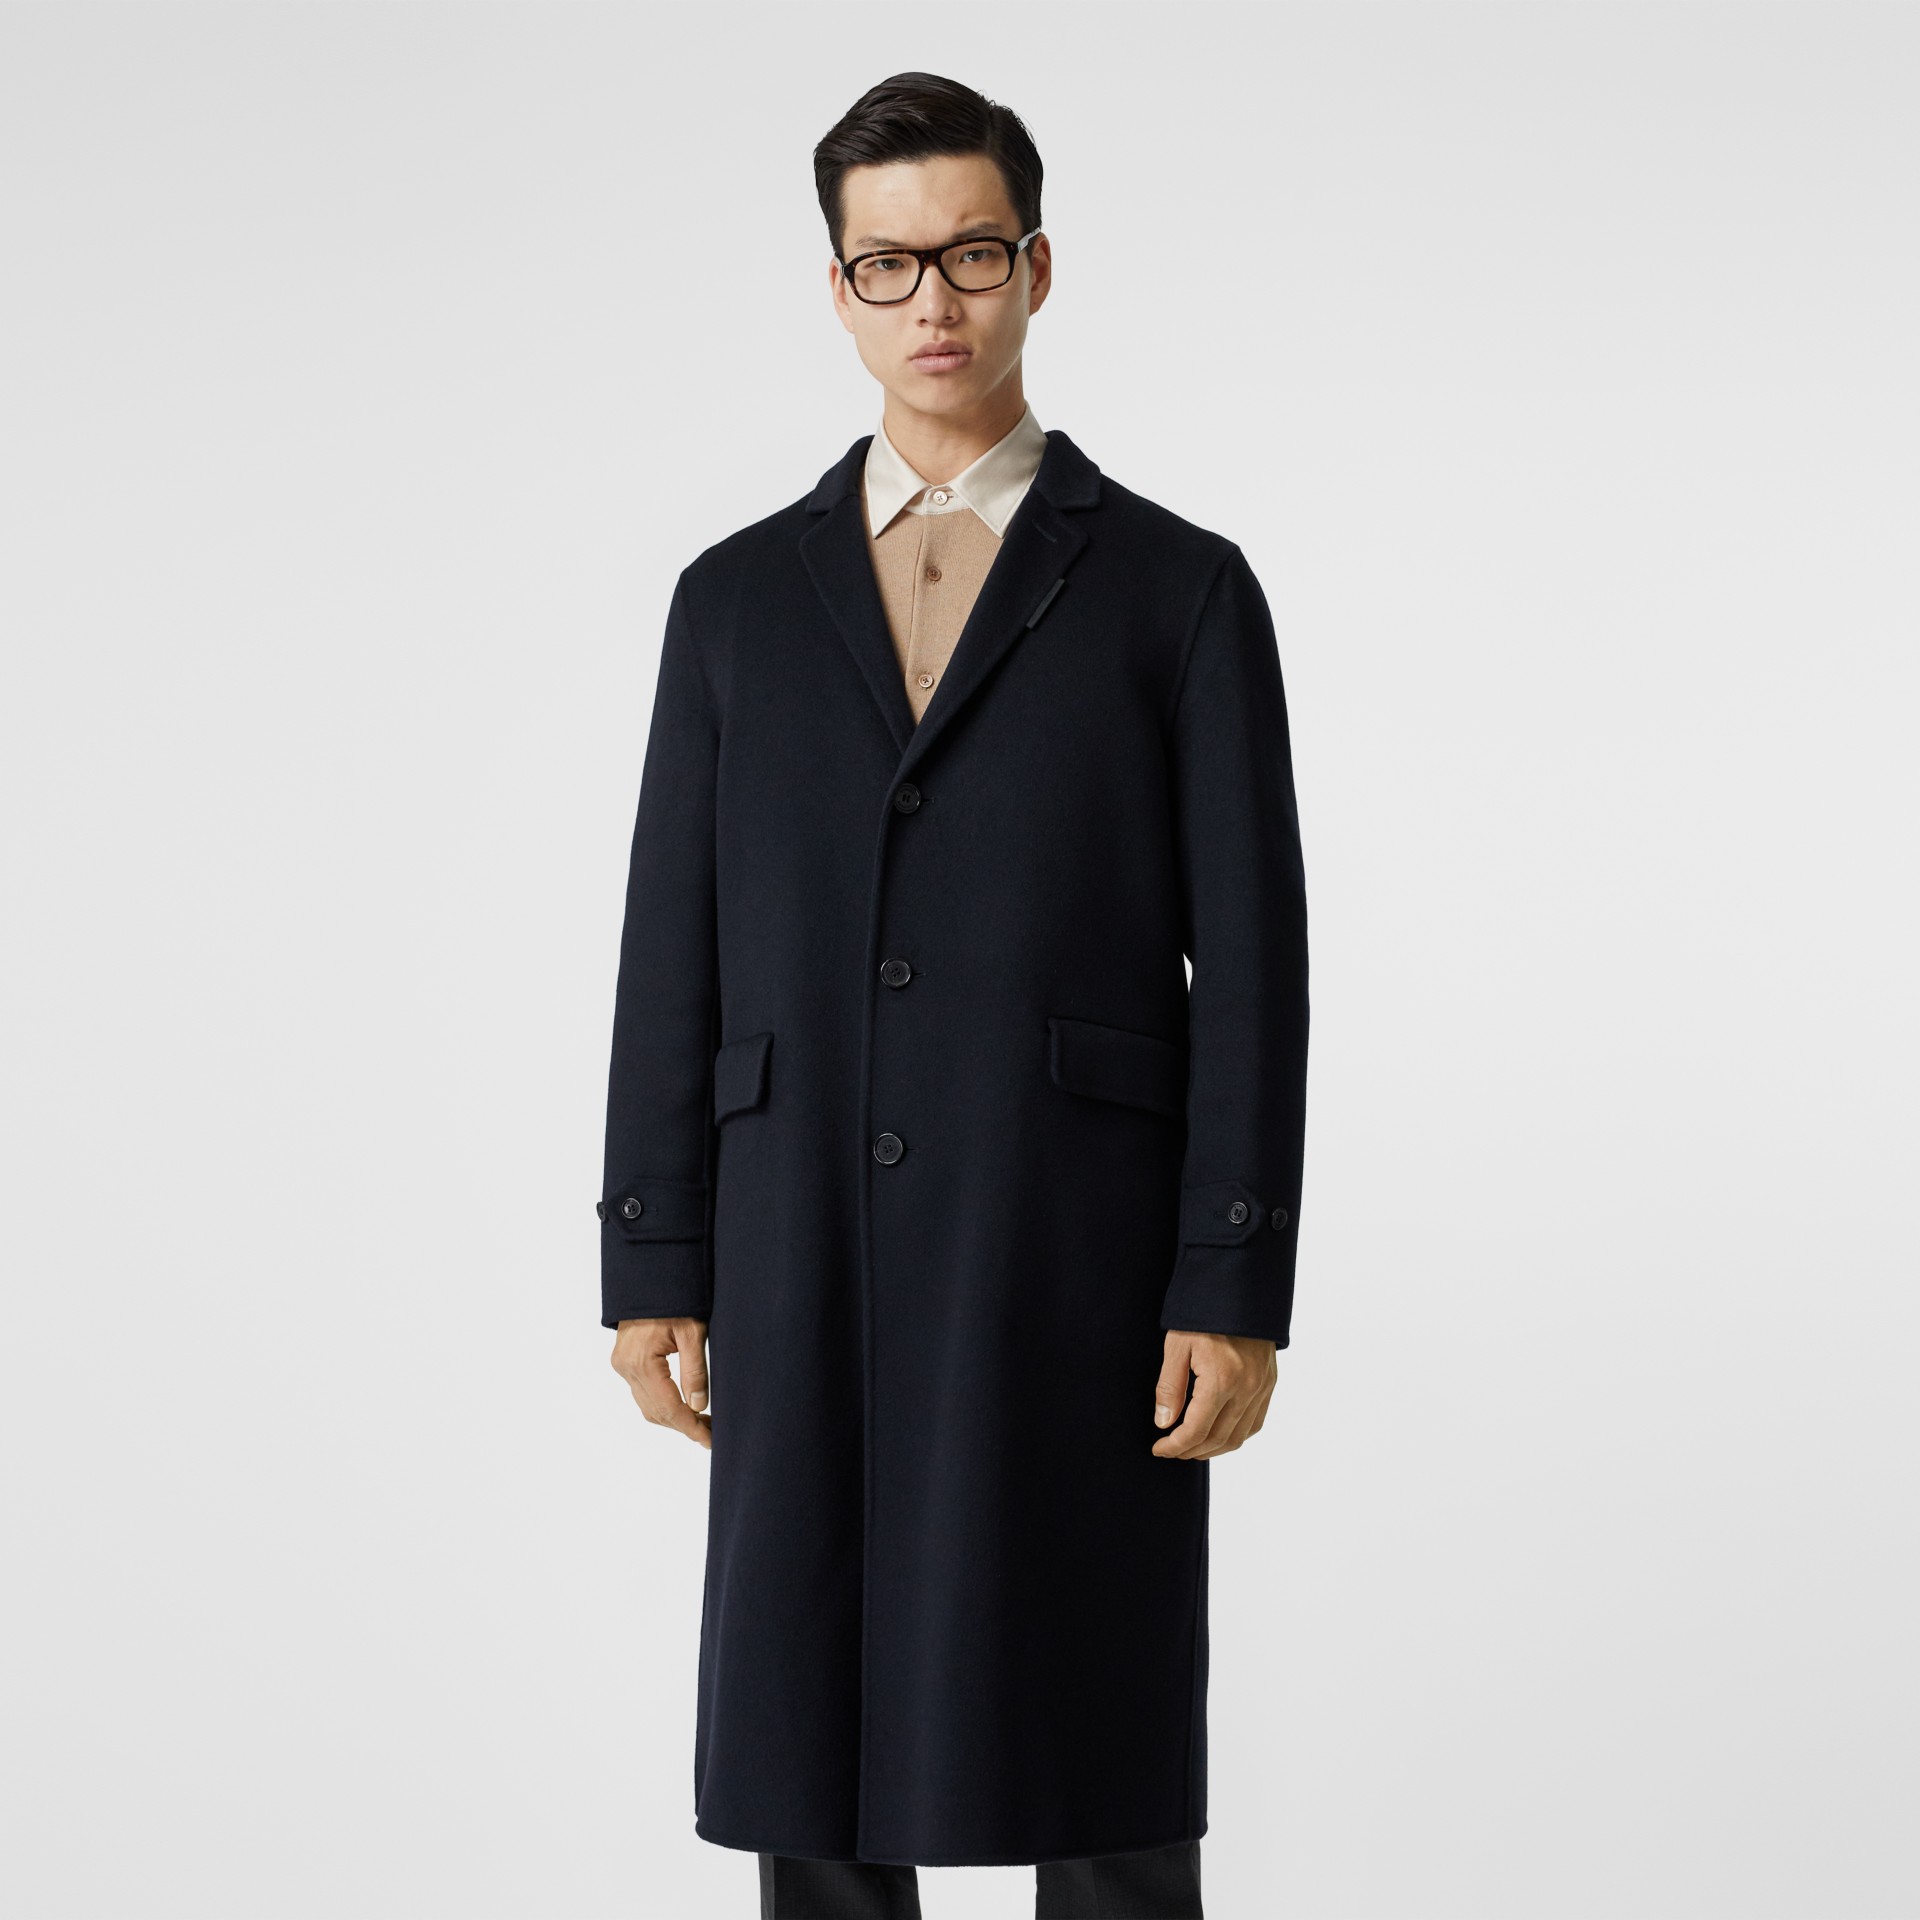 Cashmere Lab Coat in Navy - Men | Burberry United States